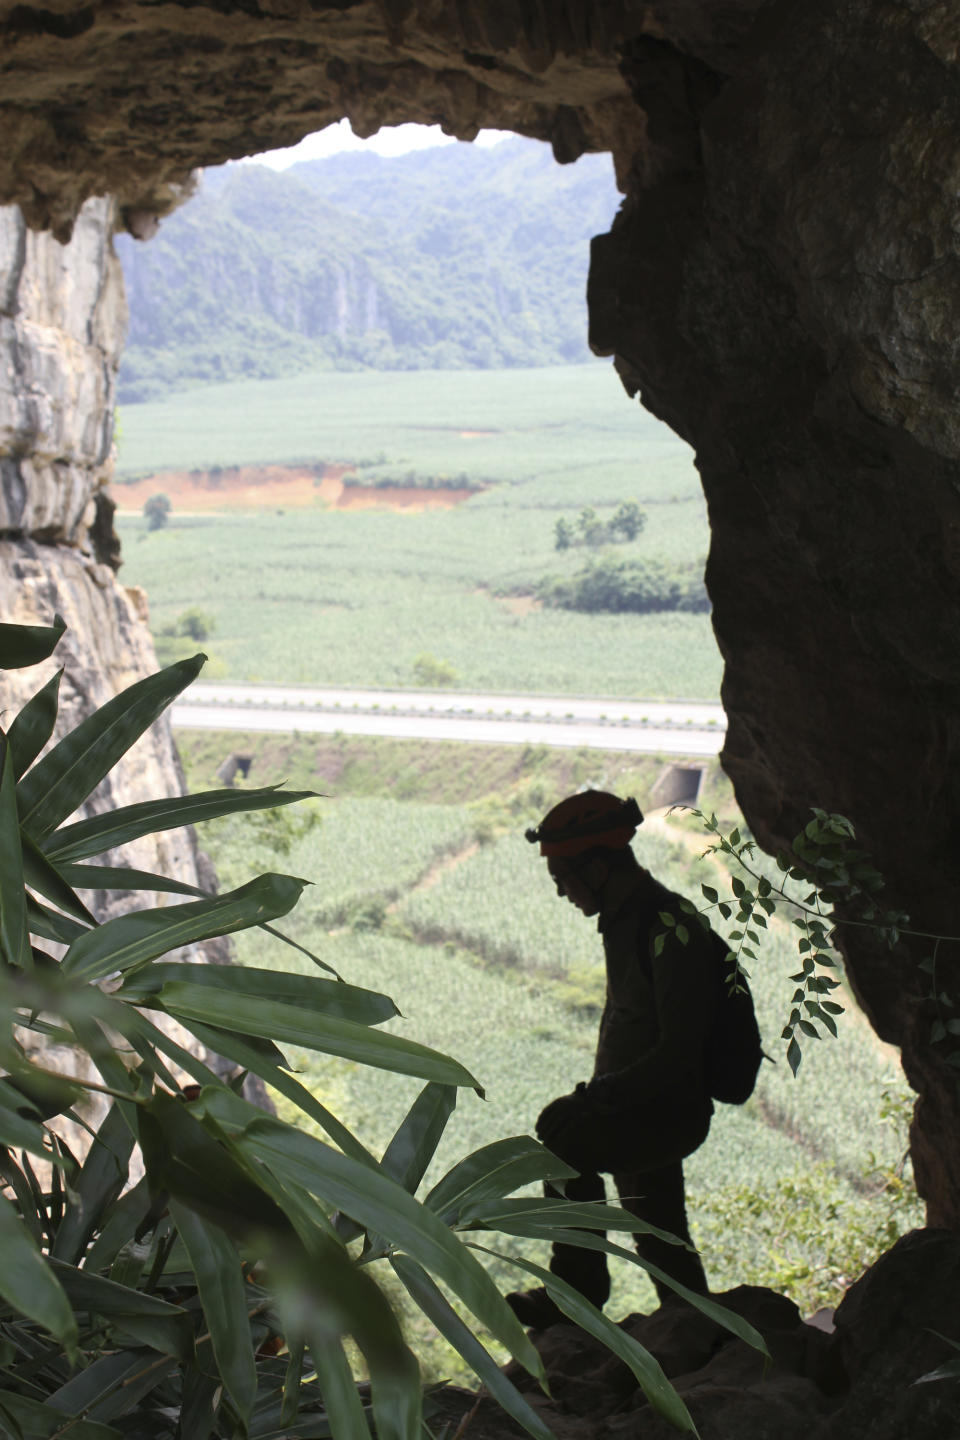 This photo provided by researchers shows an opening of a cave where Gigantopithcus blacki fossils were found, with a view across the alluvial plain, 150 meters (500 feet) above the valley floor, in the Guangxi region of southern China. The extinct species of great ape that once stood around 10 feet tall and weighed up to 650 pounds was likely driven to extinction by environmental changes, scientists in China and Australia report on Wednesday, Jan. 10, 2024 in the journal Nature. (Kira Westaway/Macquarie University via AP)